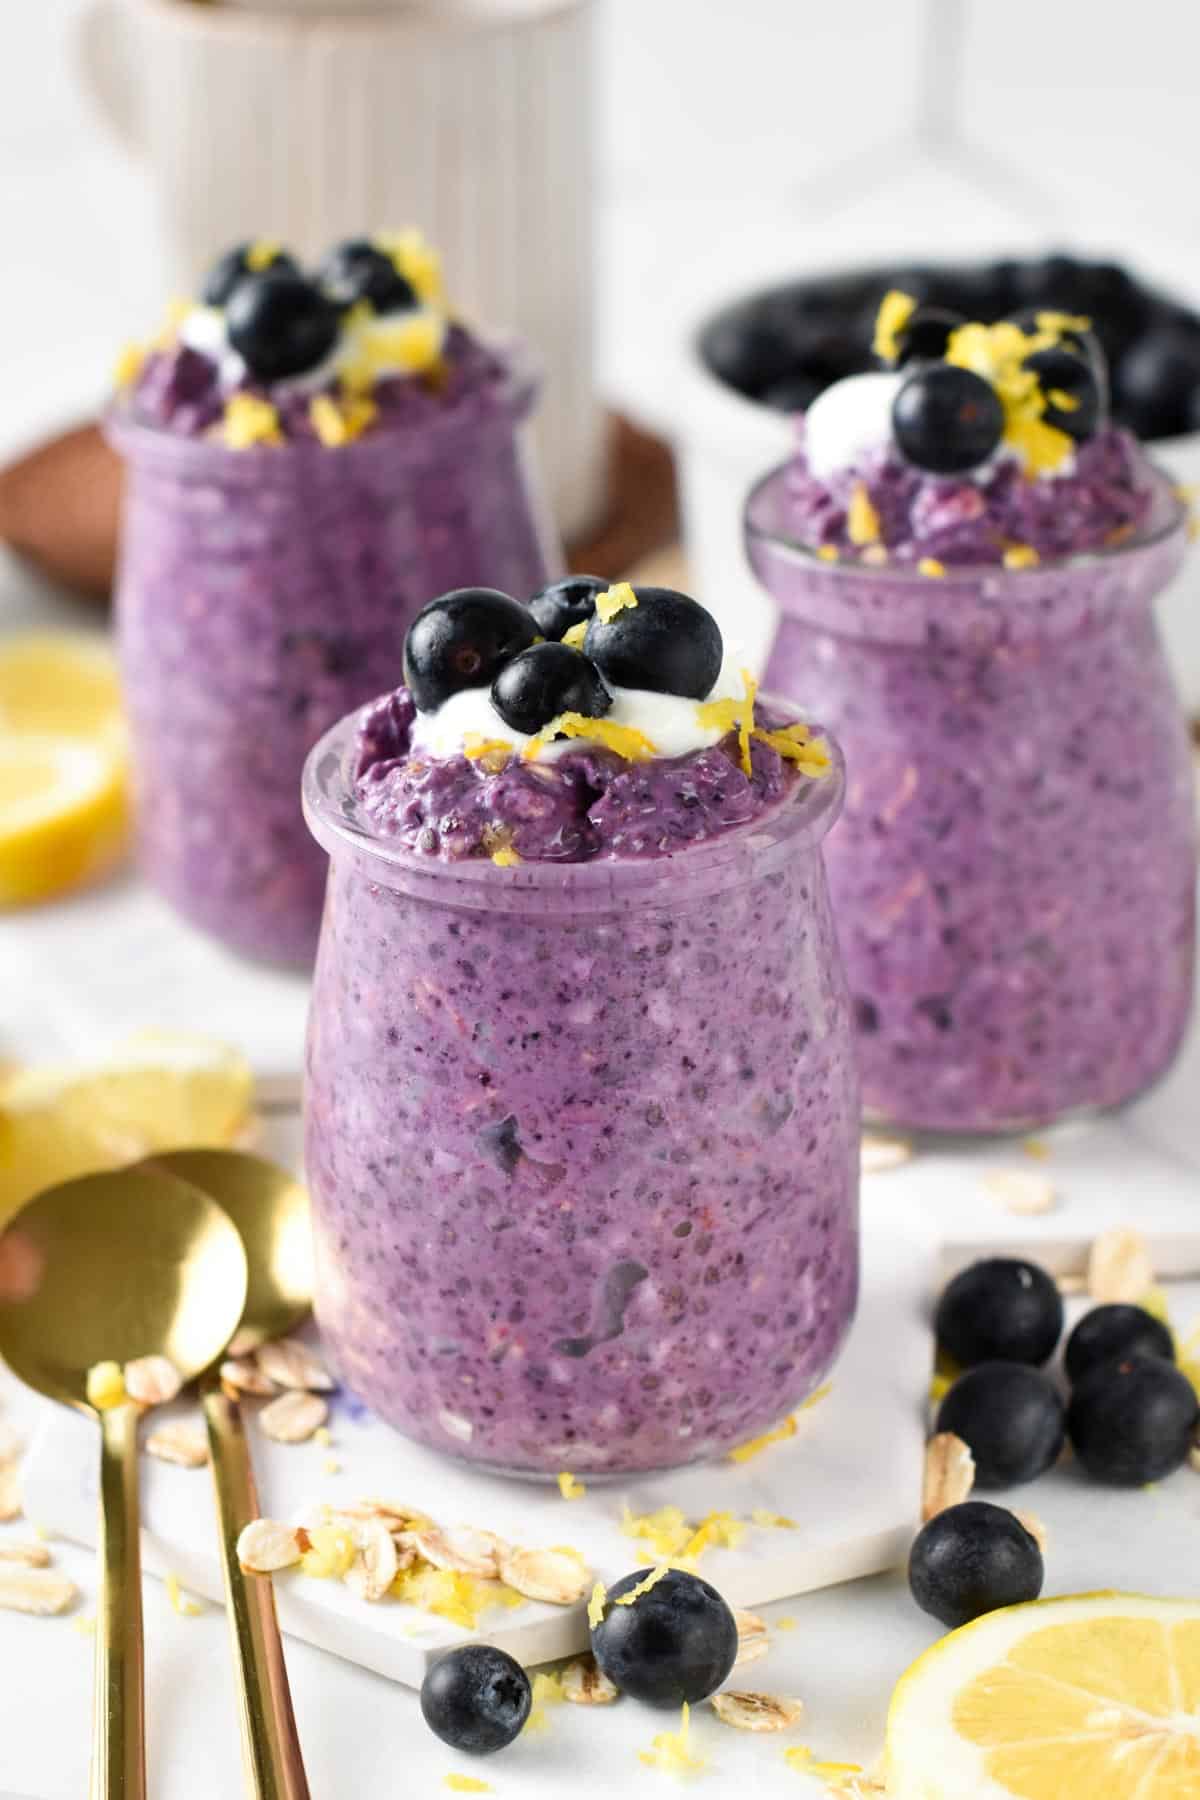 These blueberry overnight oats are a healthy creamy breakfasts packed with anti-inflammatory from blueberries and the most beautiful vibrant natural, purple color.These blueberry overnight oats are a healthy creamy breakfasts packed with anti-inflammatory from blueberries and the most beautiful vibrant natural, purple color.